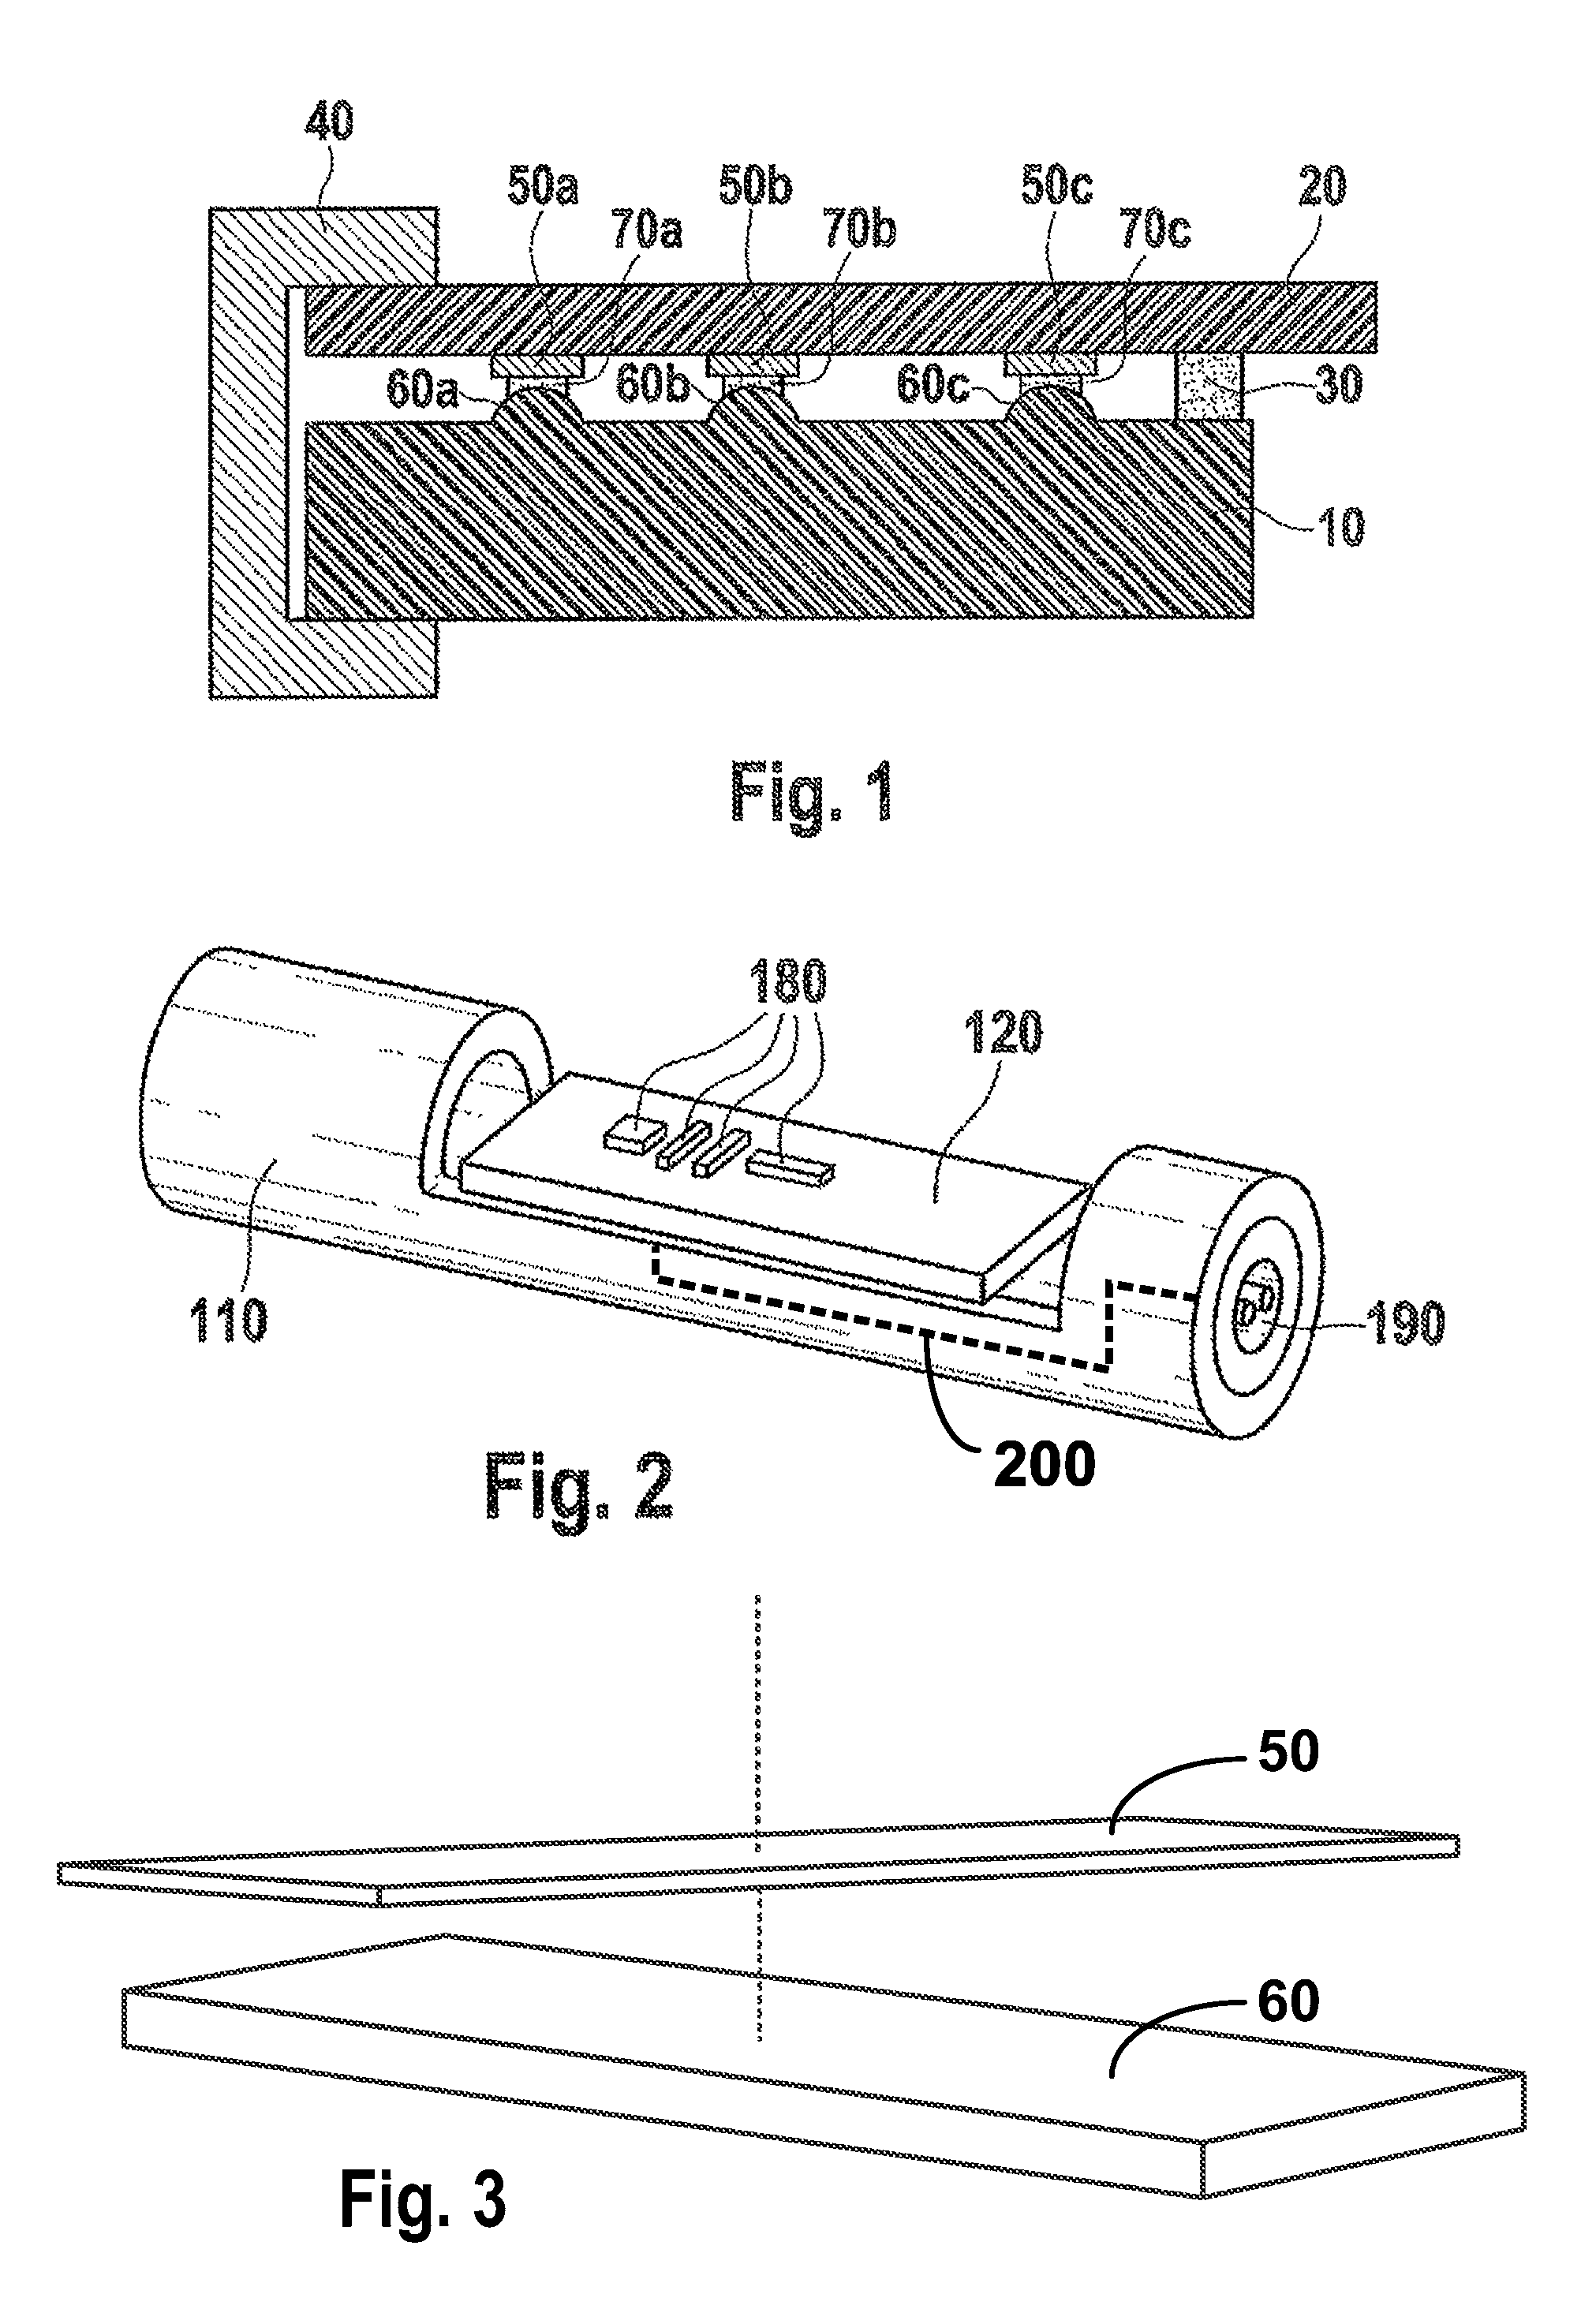 Electric circuit configuration having an MID circuit carrier and a connecting interface connected to it